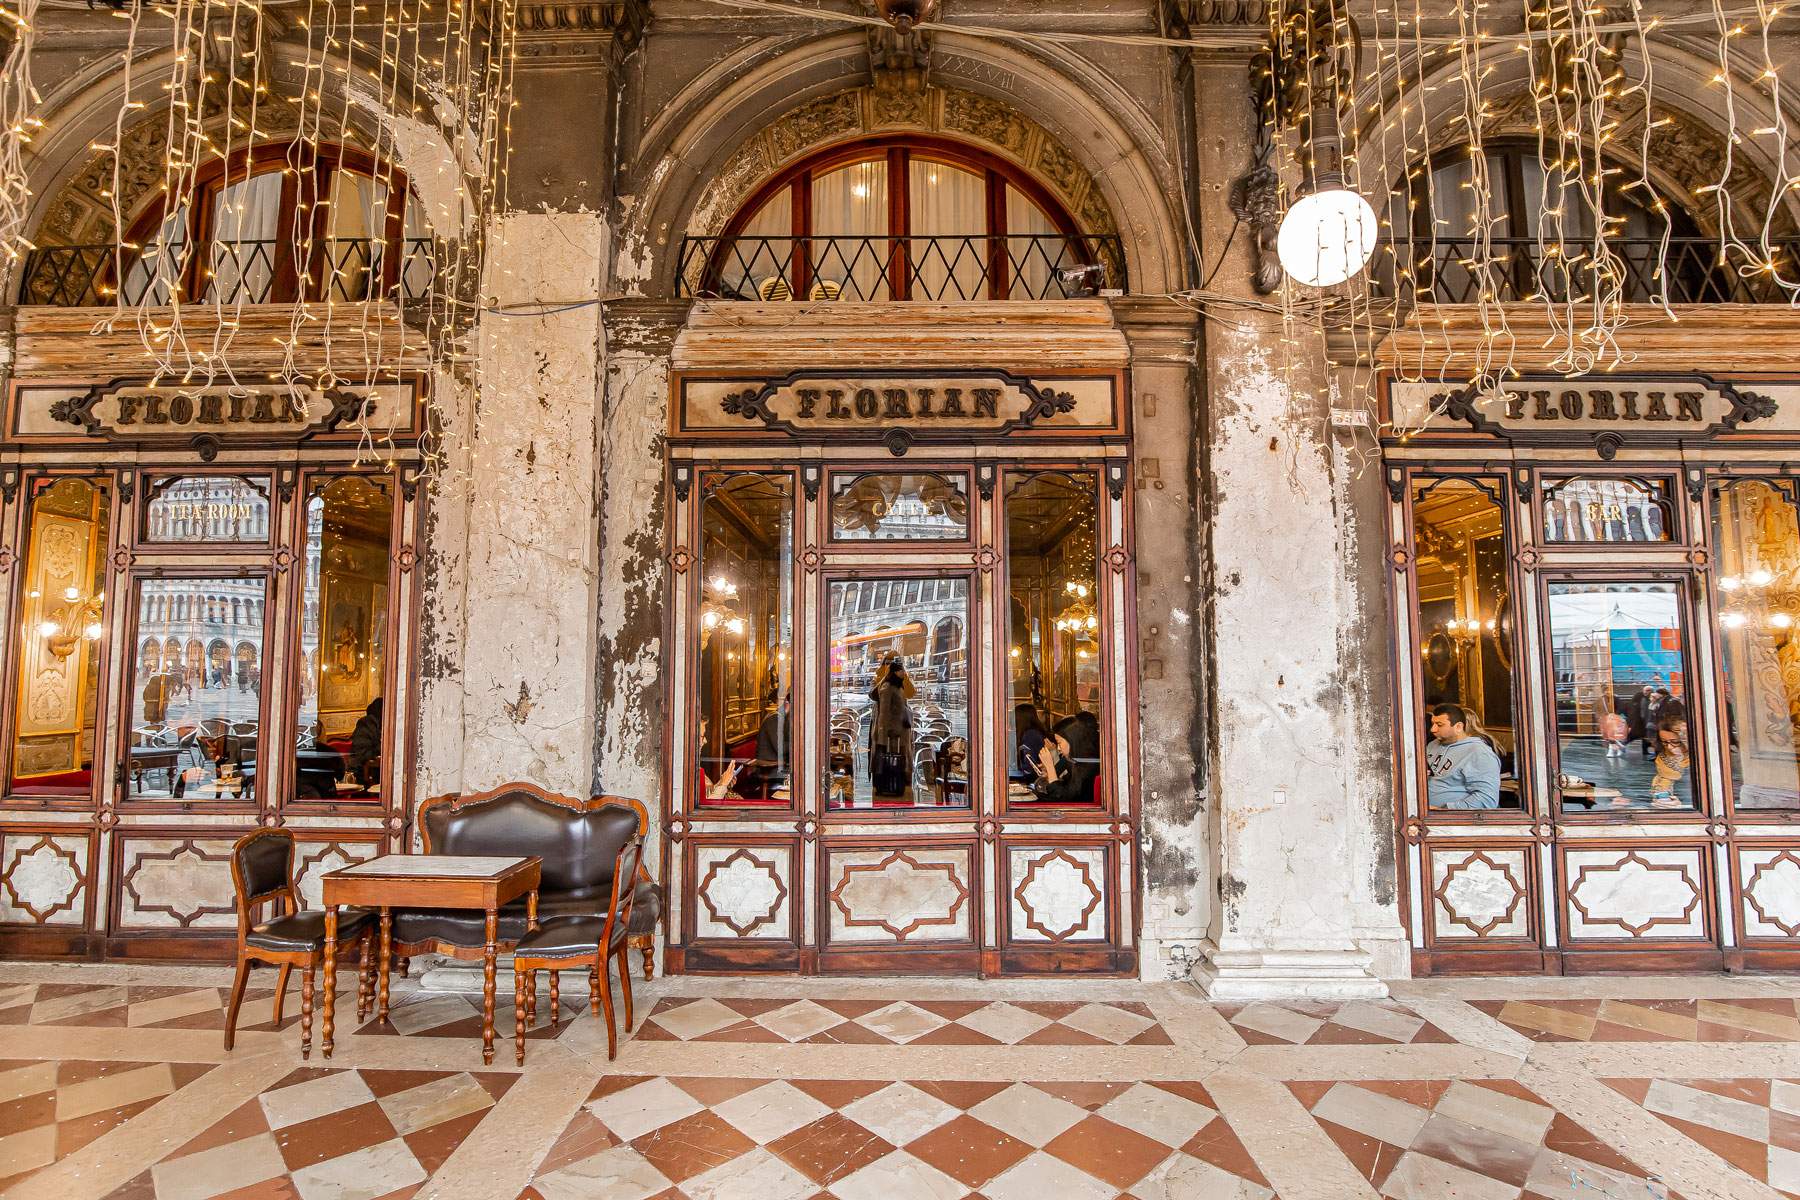 Oldest cafe in the world